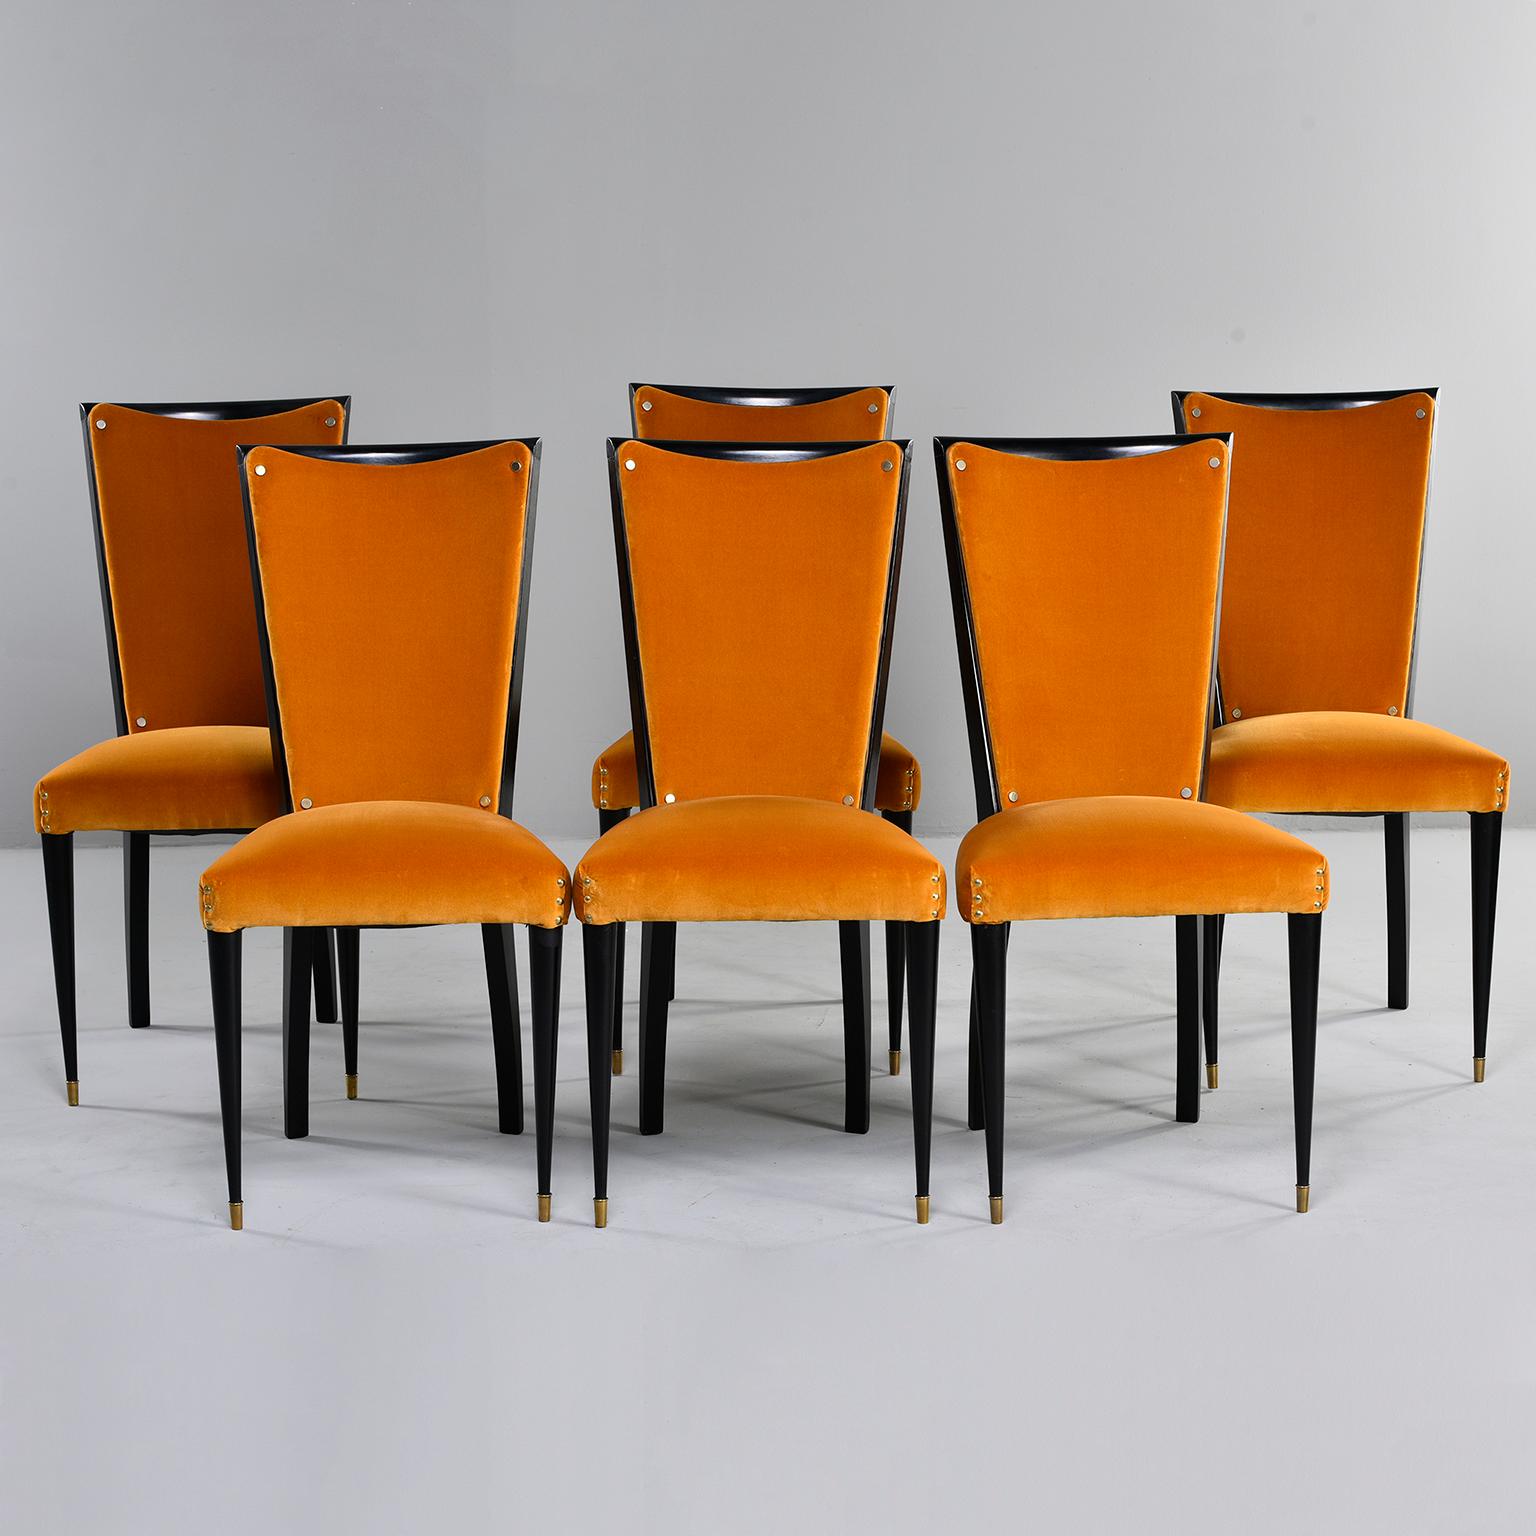 Set of six ebonised deco style dining chairs, circa 1940s. Chairs have tapered front legs with brass foot caps. Recently upholstered in poppy gold velvet that is in very good overall condition with virtually no signs of wear. Accented with brass